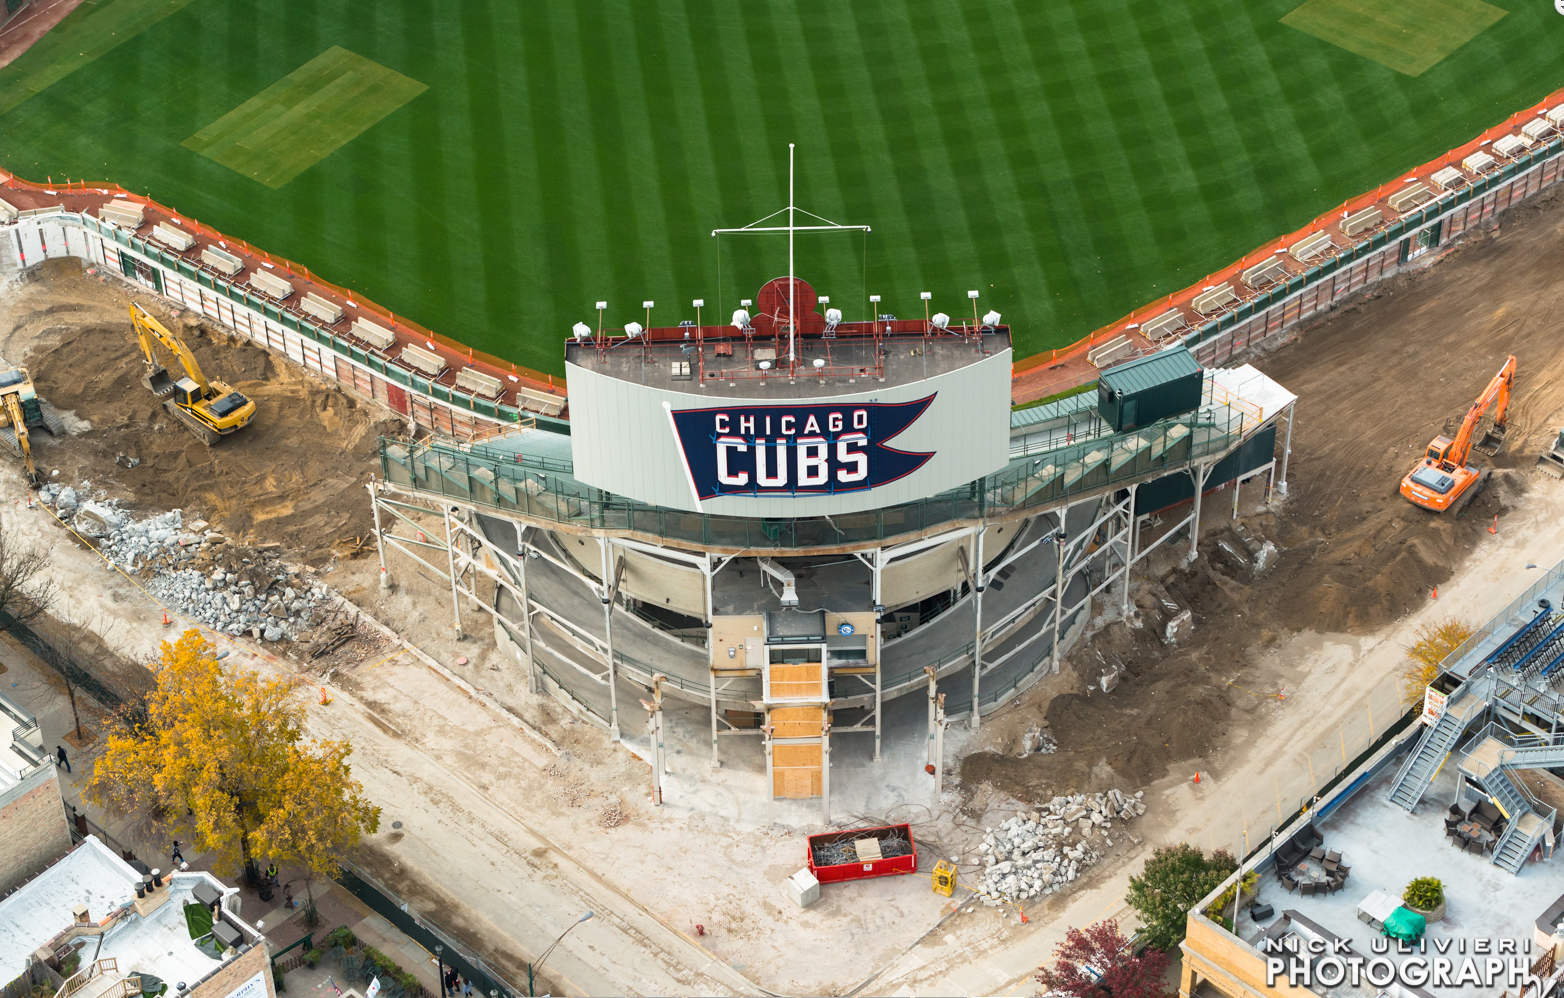 Pictures: Proposed Wrigley Field renovations